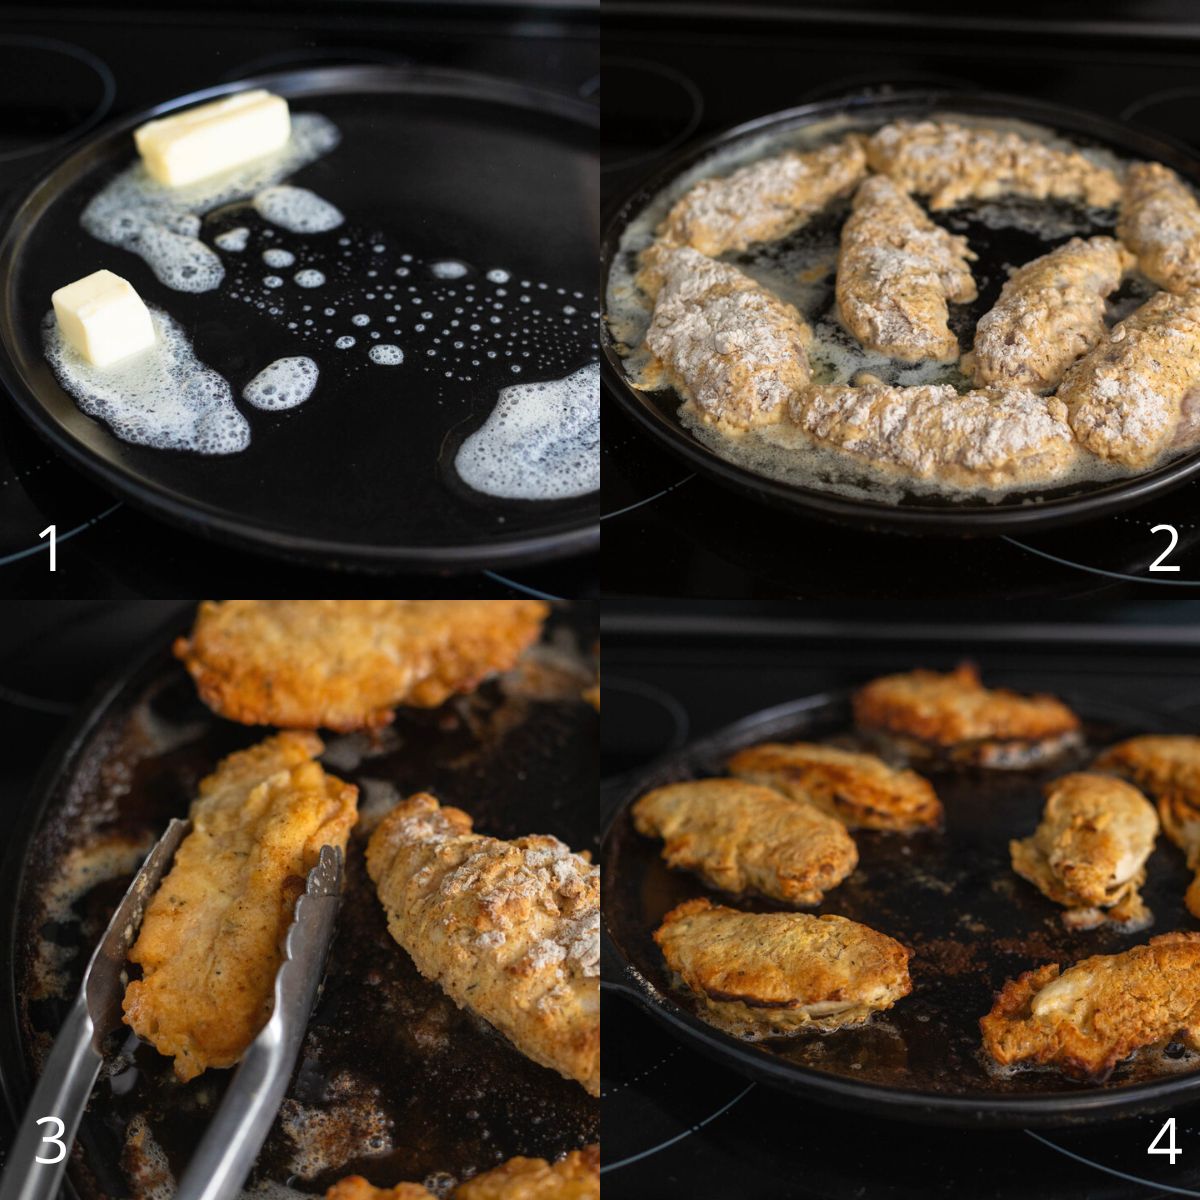 The step by step photos show how to bake the fried chicken in the oven.